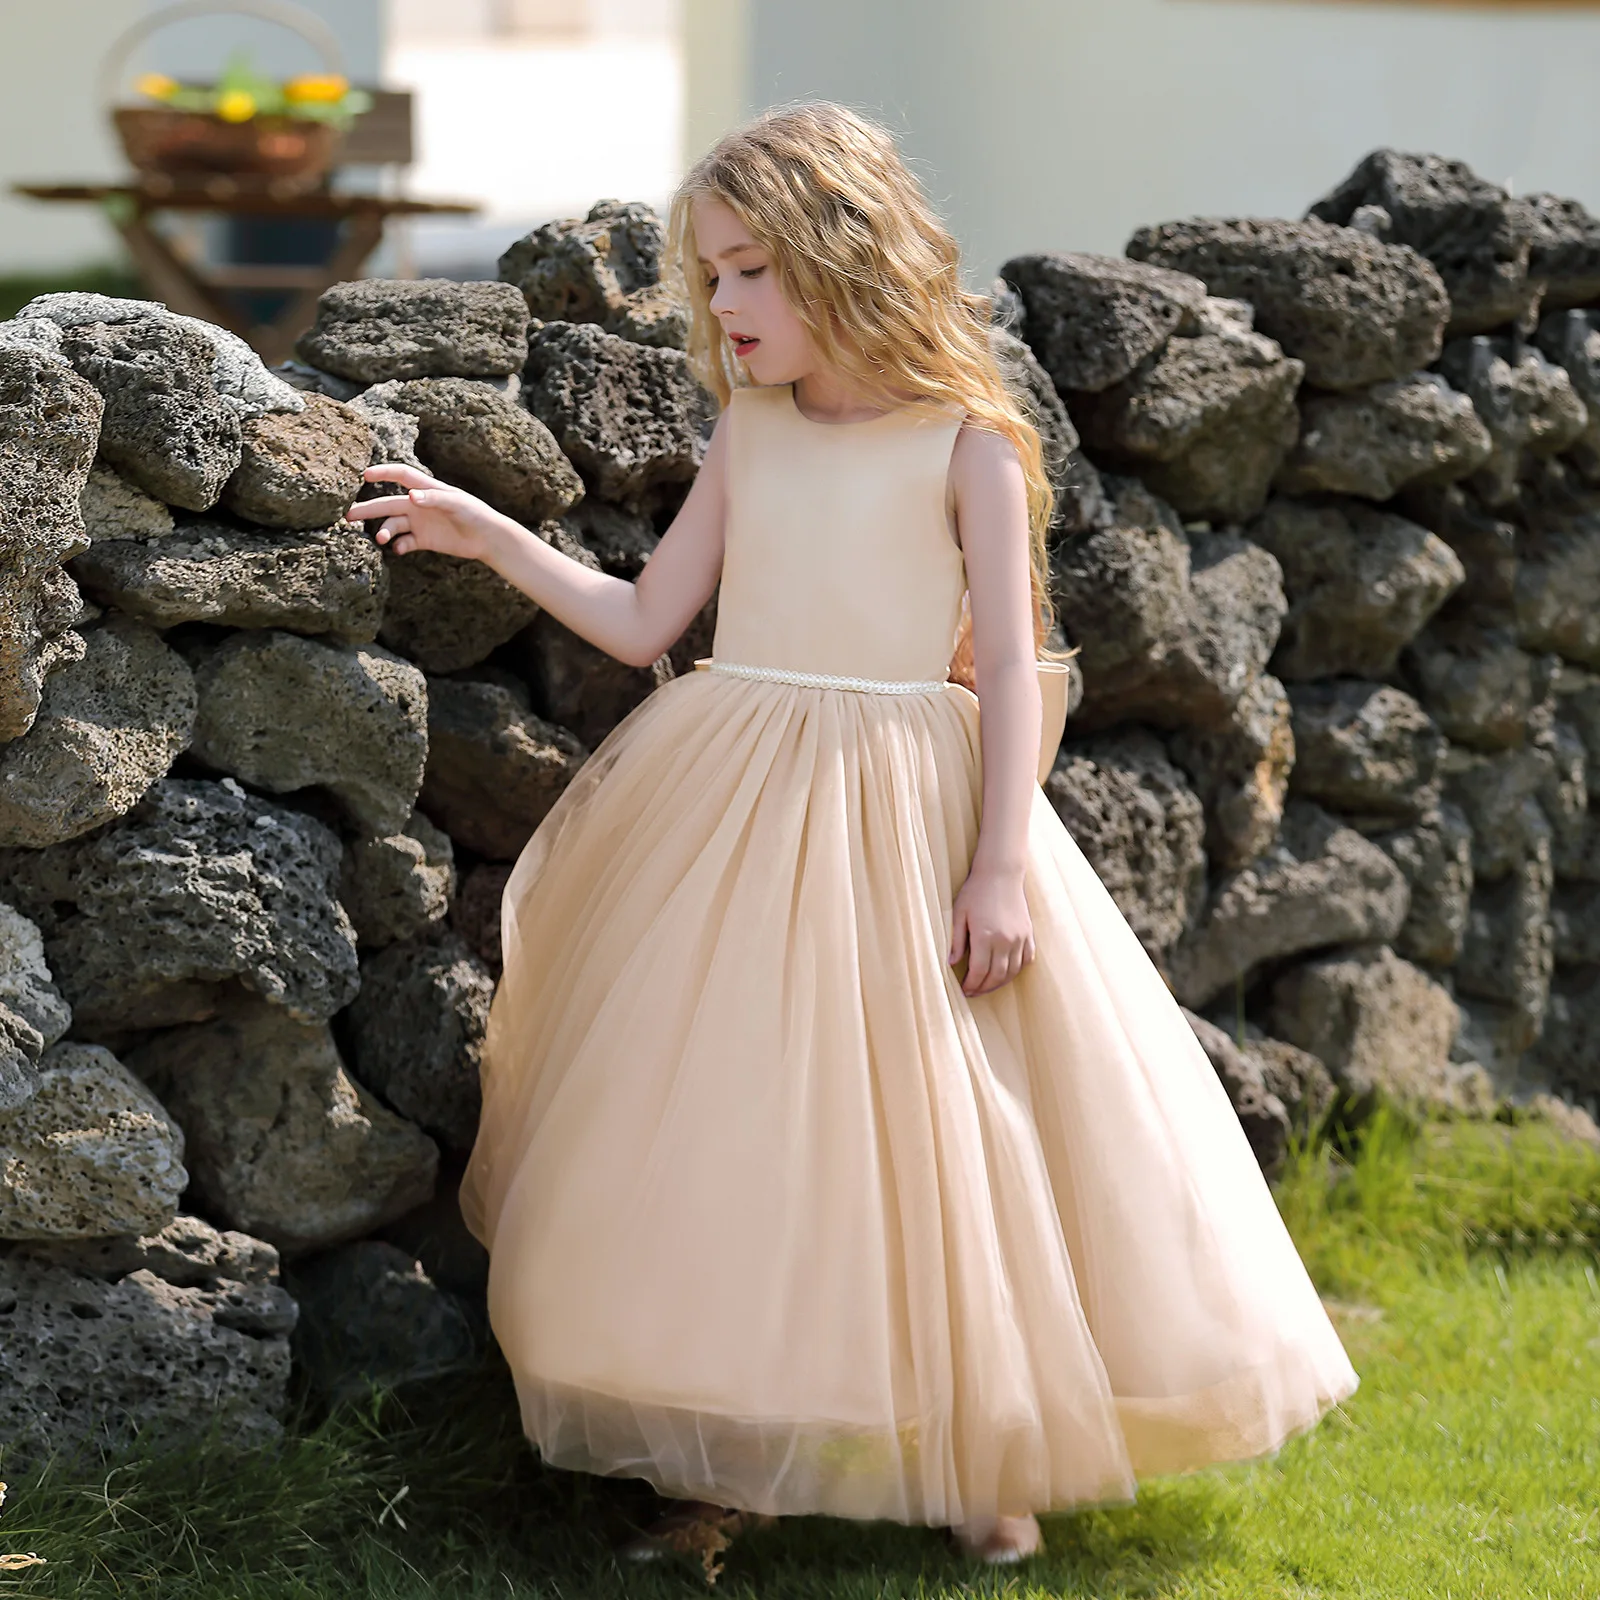 

Tulle A Line Flower Girl Dresses Lace Appliques Jewel Neck Beaded Vintage Pageant Gowns Backless Girls Birthday Party Dress